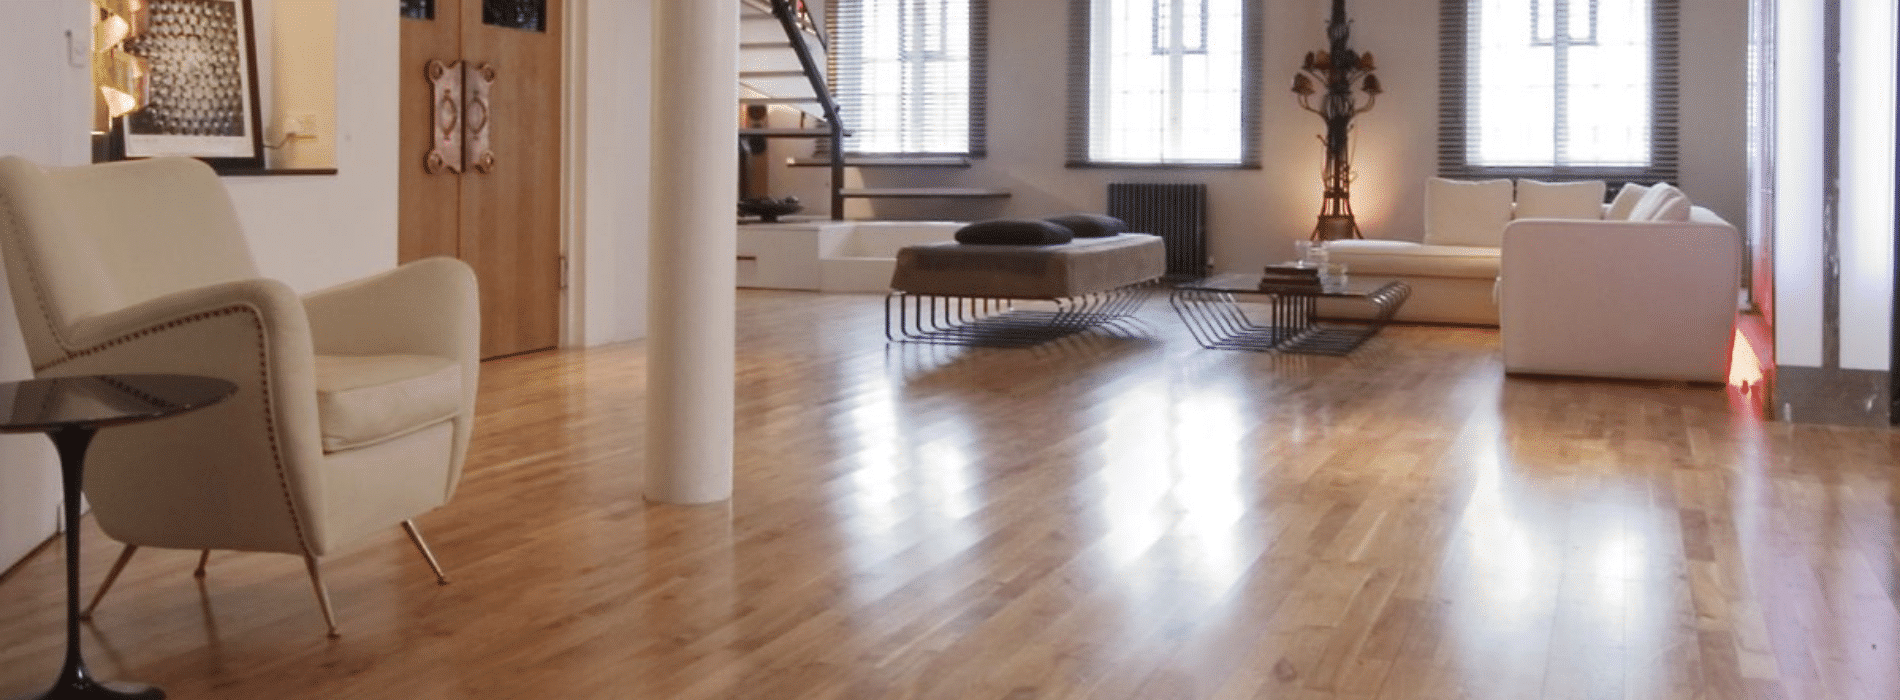 Professionally restored 8-year-old hardwood floor in West Hampstead, NW6. Mr Sander® used Bona 2.2K Frost whitewashing and Traffic HD matte lacquer for a durable, low sheen finish. Enjoy the timeless elegance of our high-quality floor restoration services.